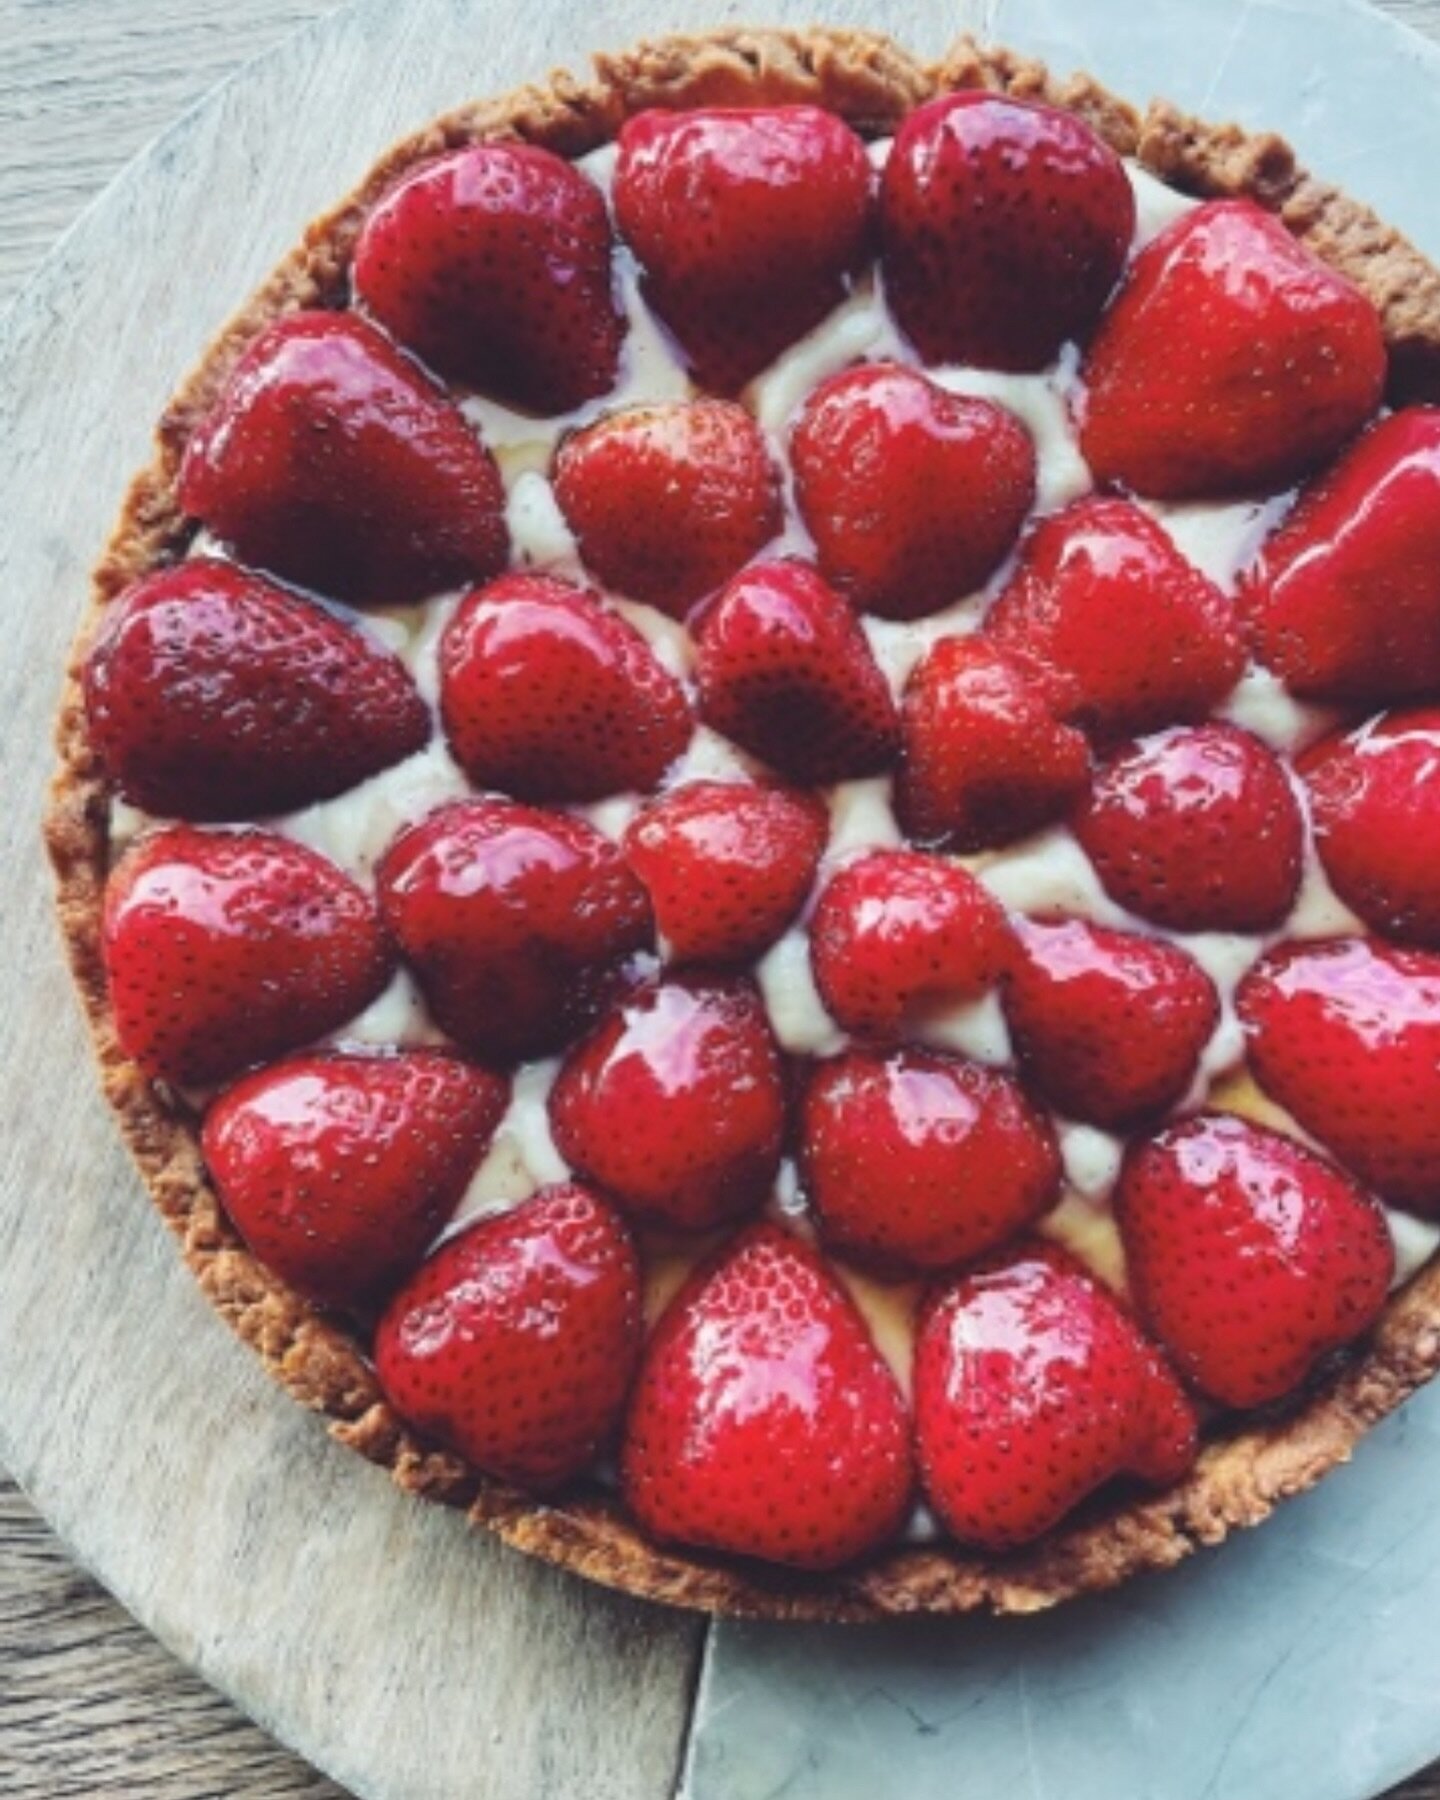 It&rsquo;s going to be a gorgeous weekend, both weather-wise and food-wise. ☀️ Our bakery team is making classic Danish strawberry tarts all weekend long, and you can buy these gems by the slice or as a whole tart. 
Enjoy! 🍓 

#jordb&aelig;rt&aelig;